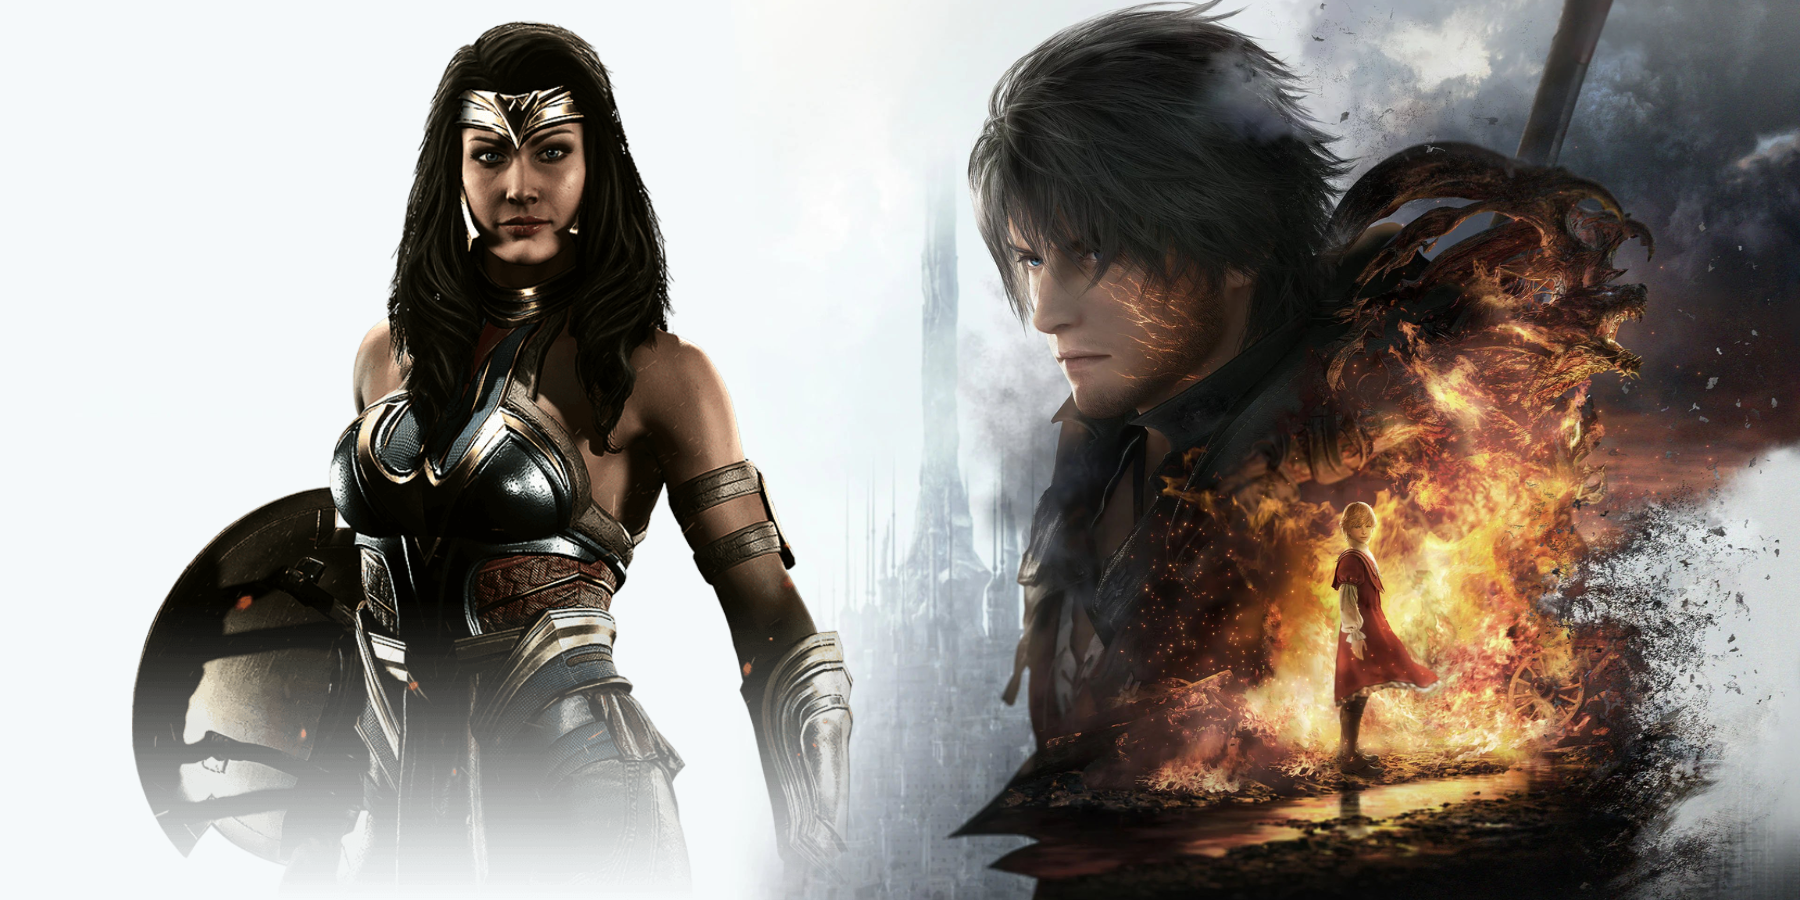 Monolith's Wonder Woman Stands Out as a Lone Single-Player Game in